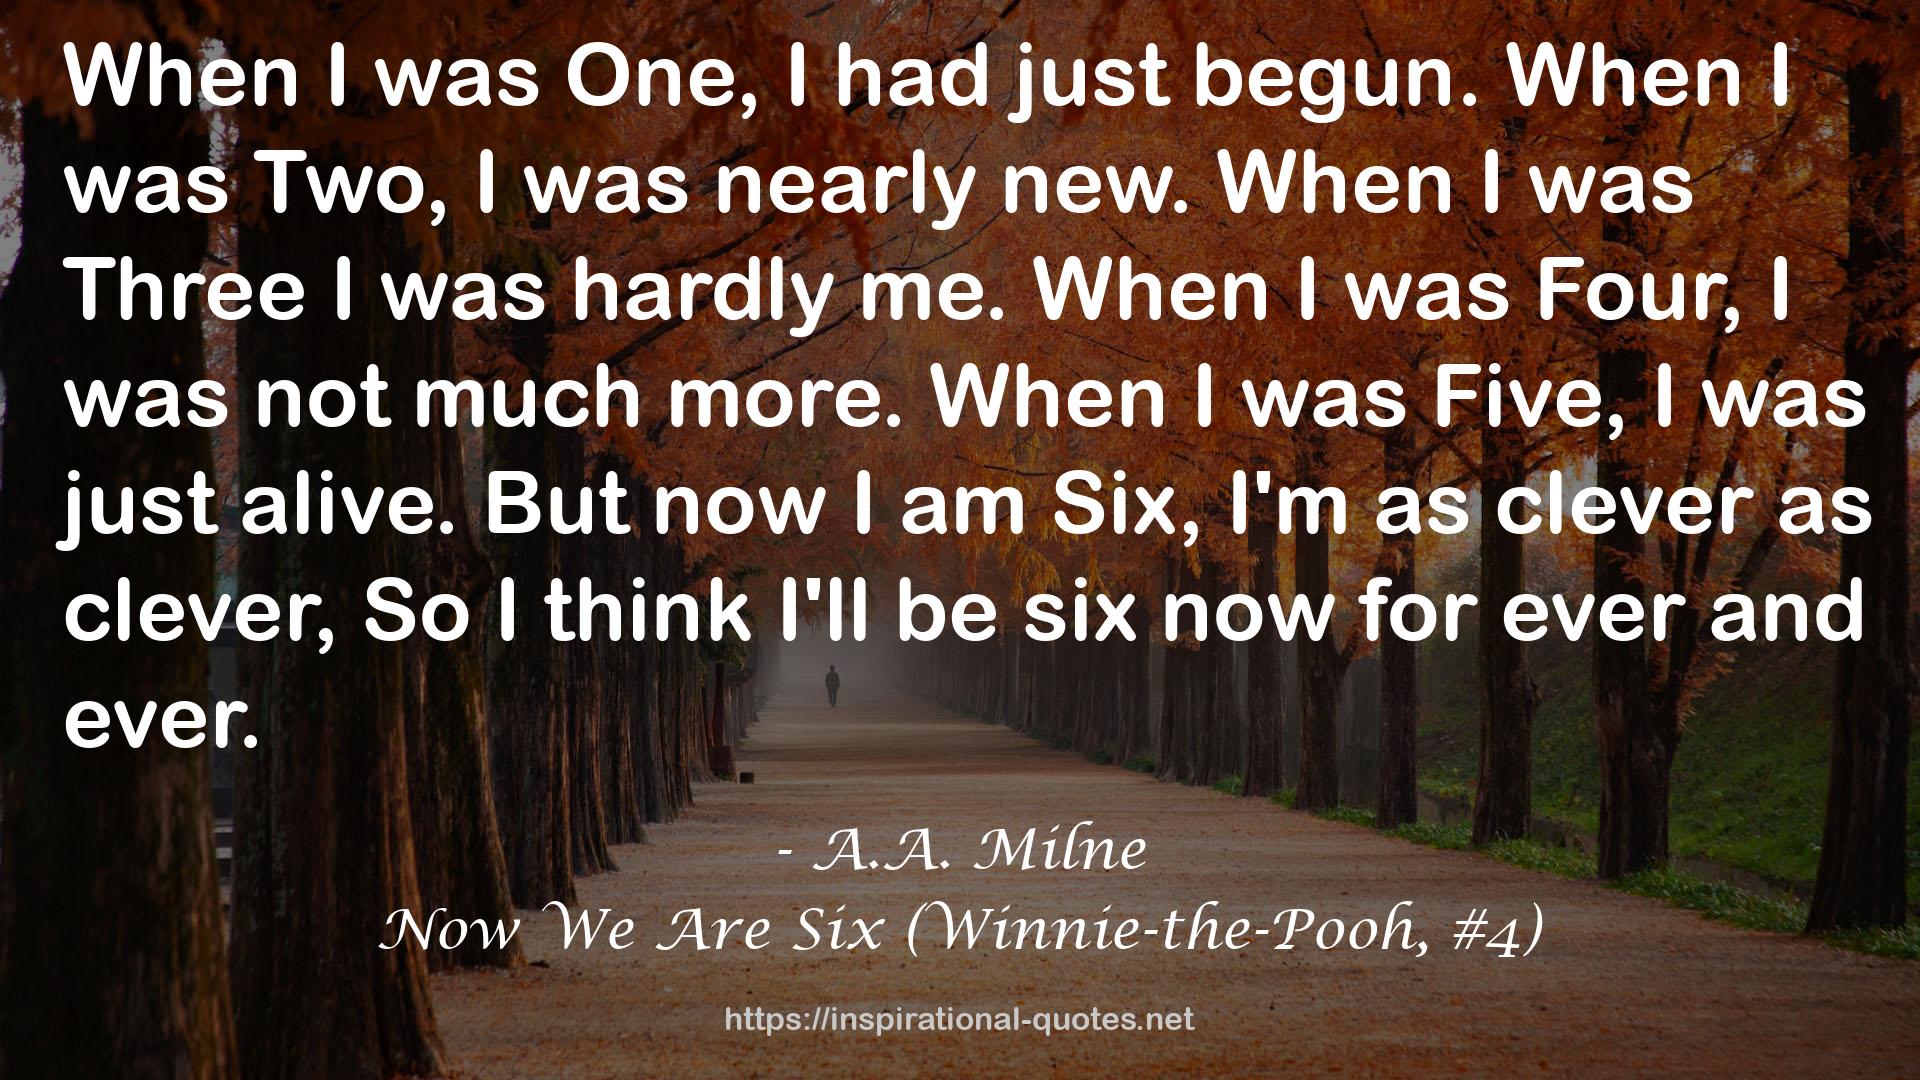 Now We Are Six (Winnie-the-Pooh, #4) QUOTES